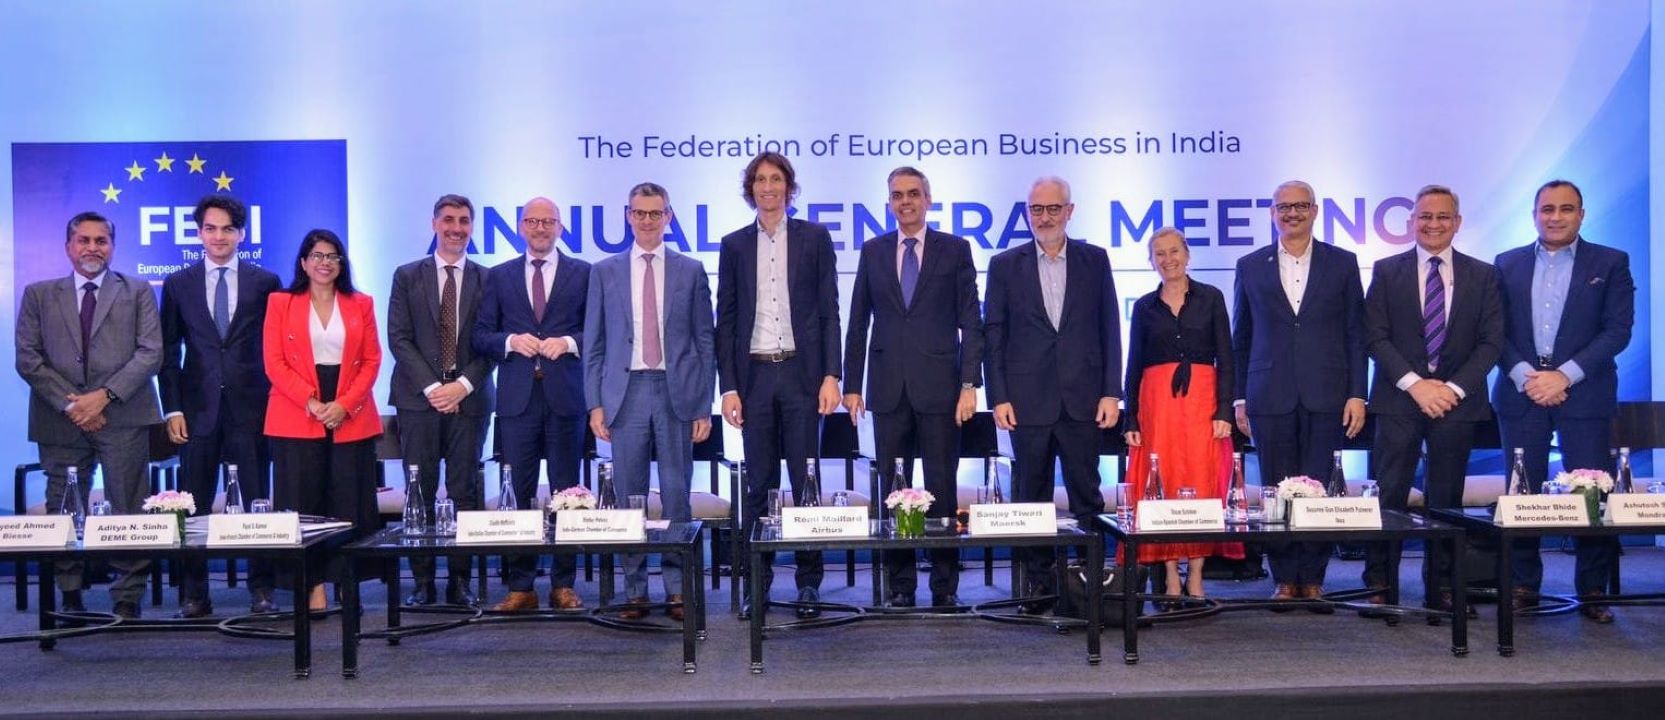 The newly formed EU trade body FEBI has elected its office bearers and aims to energize businesses between the EU and India.